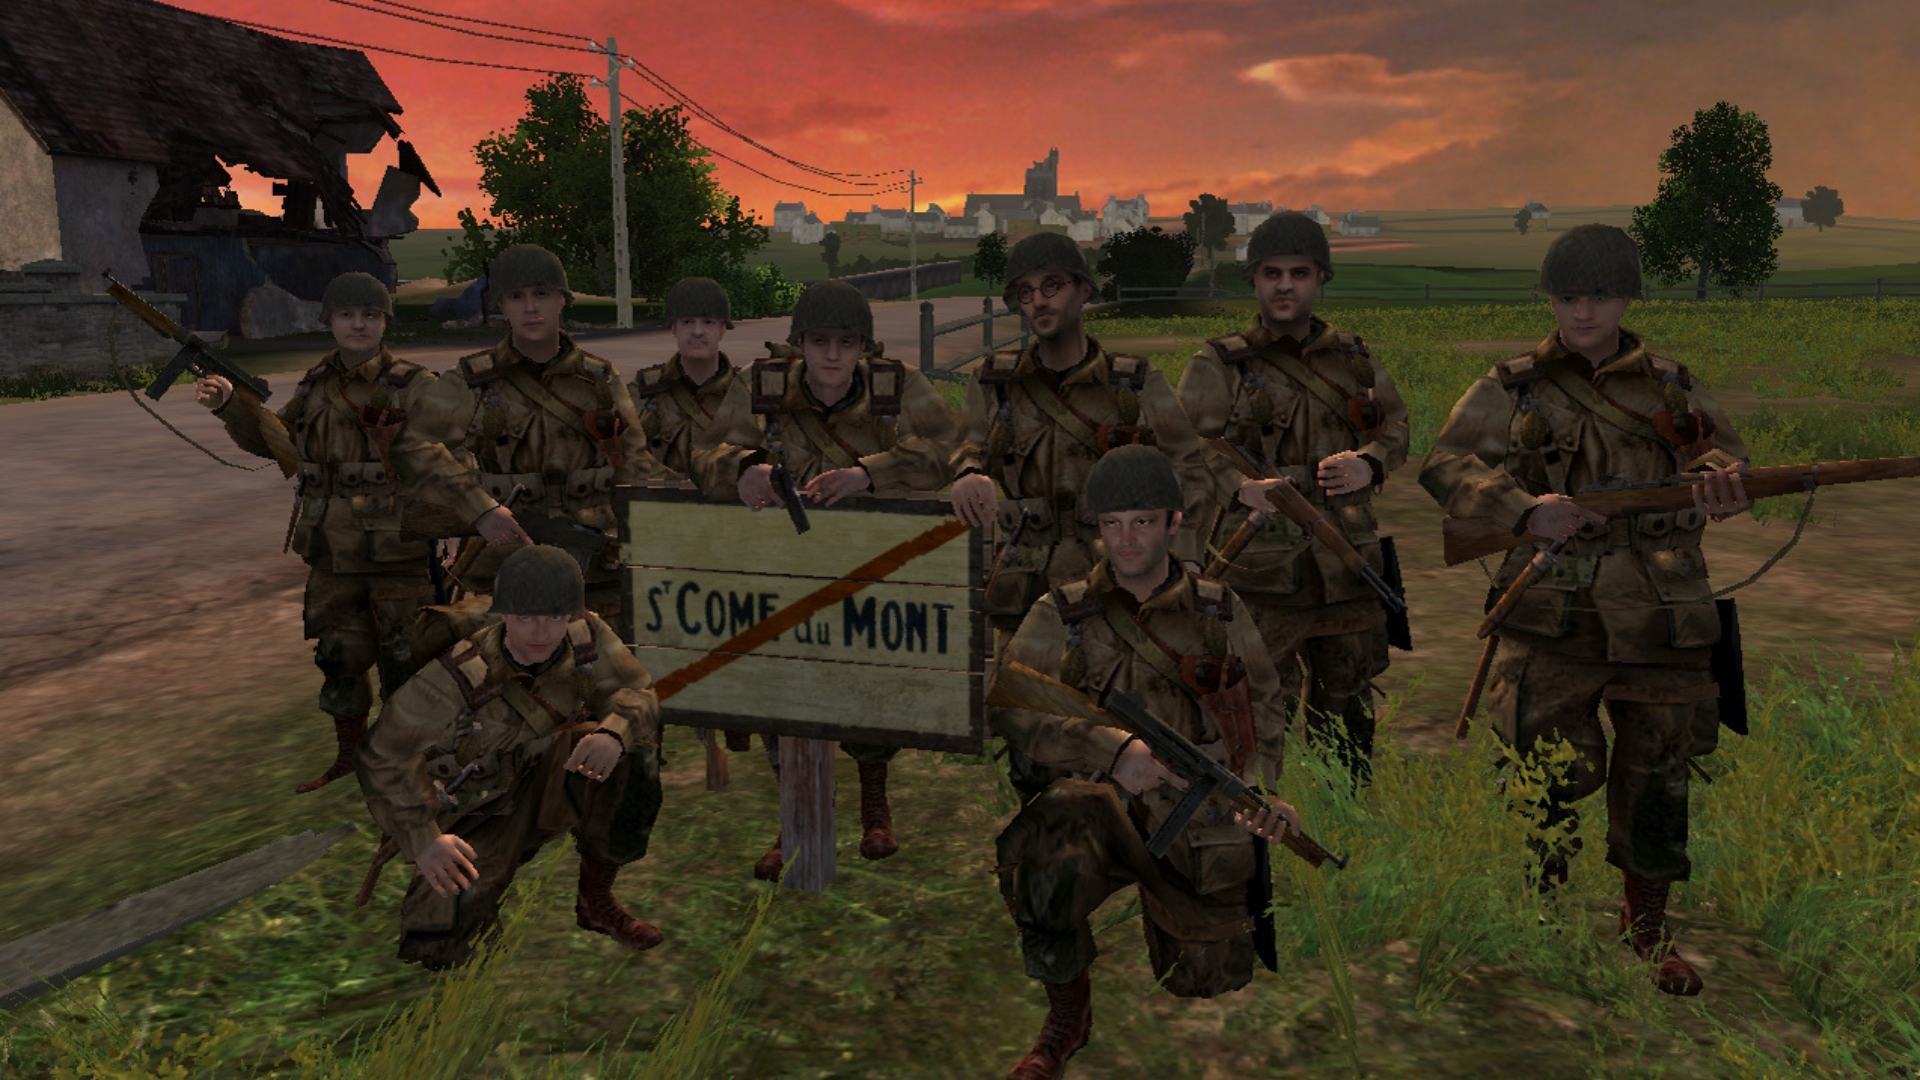 Best war games - Brothers in Arms Road to Hill 30. Image shows a ground of soldiers posing for a group photo.